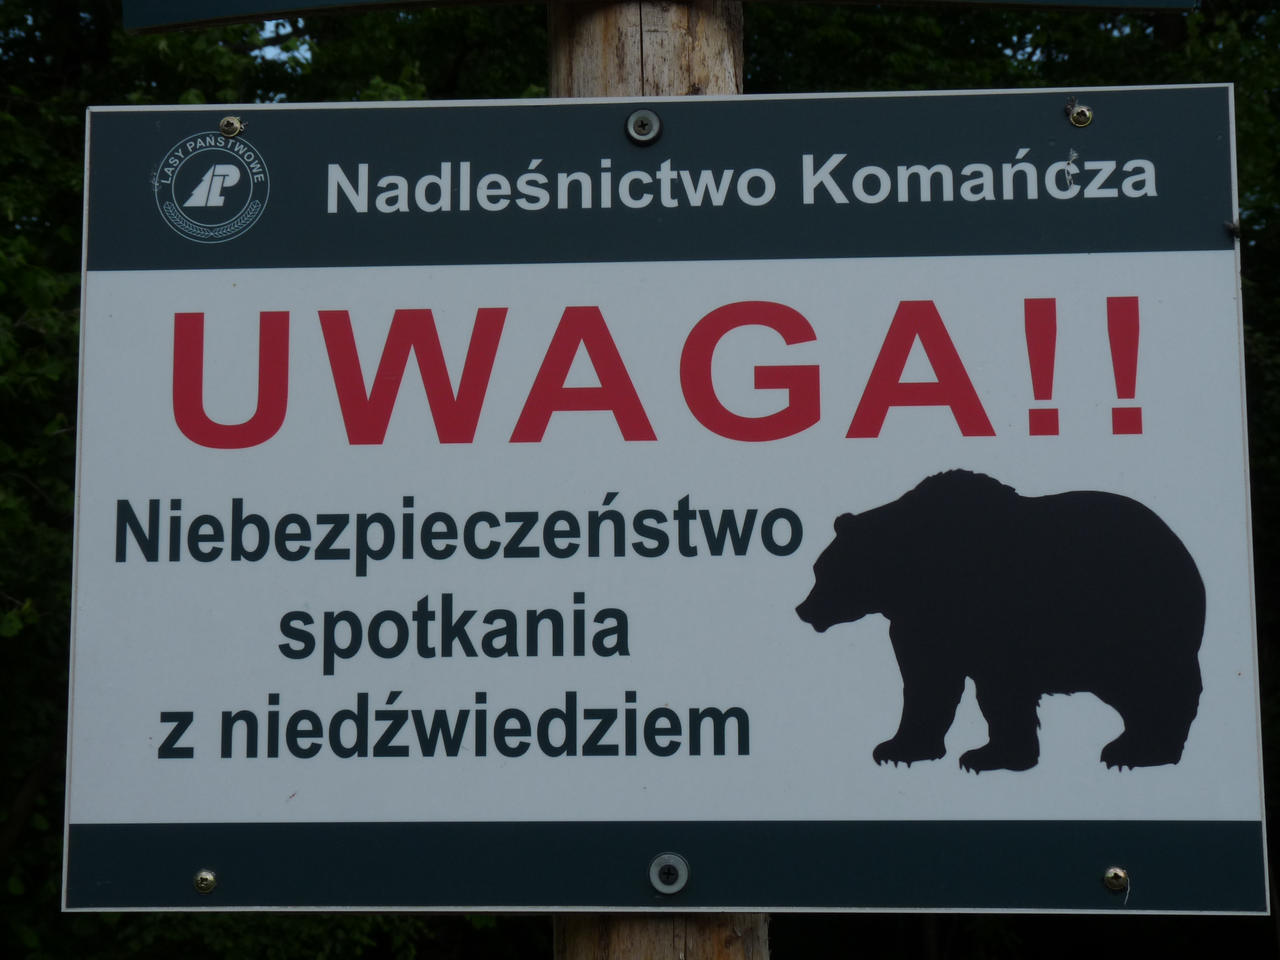 Grizzly Bear Warning Sign